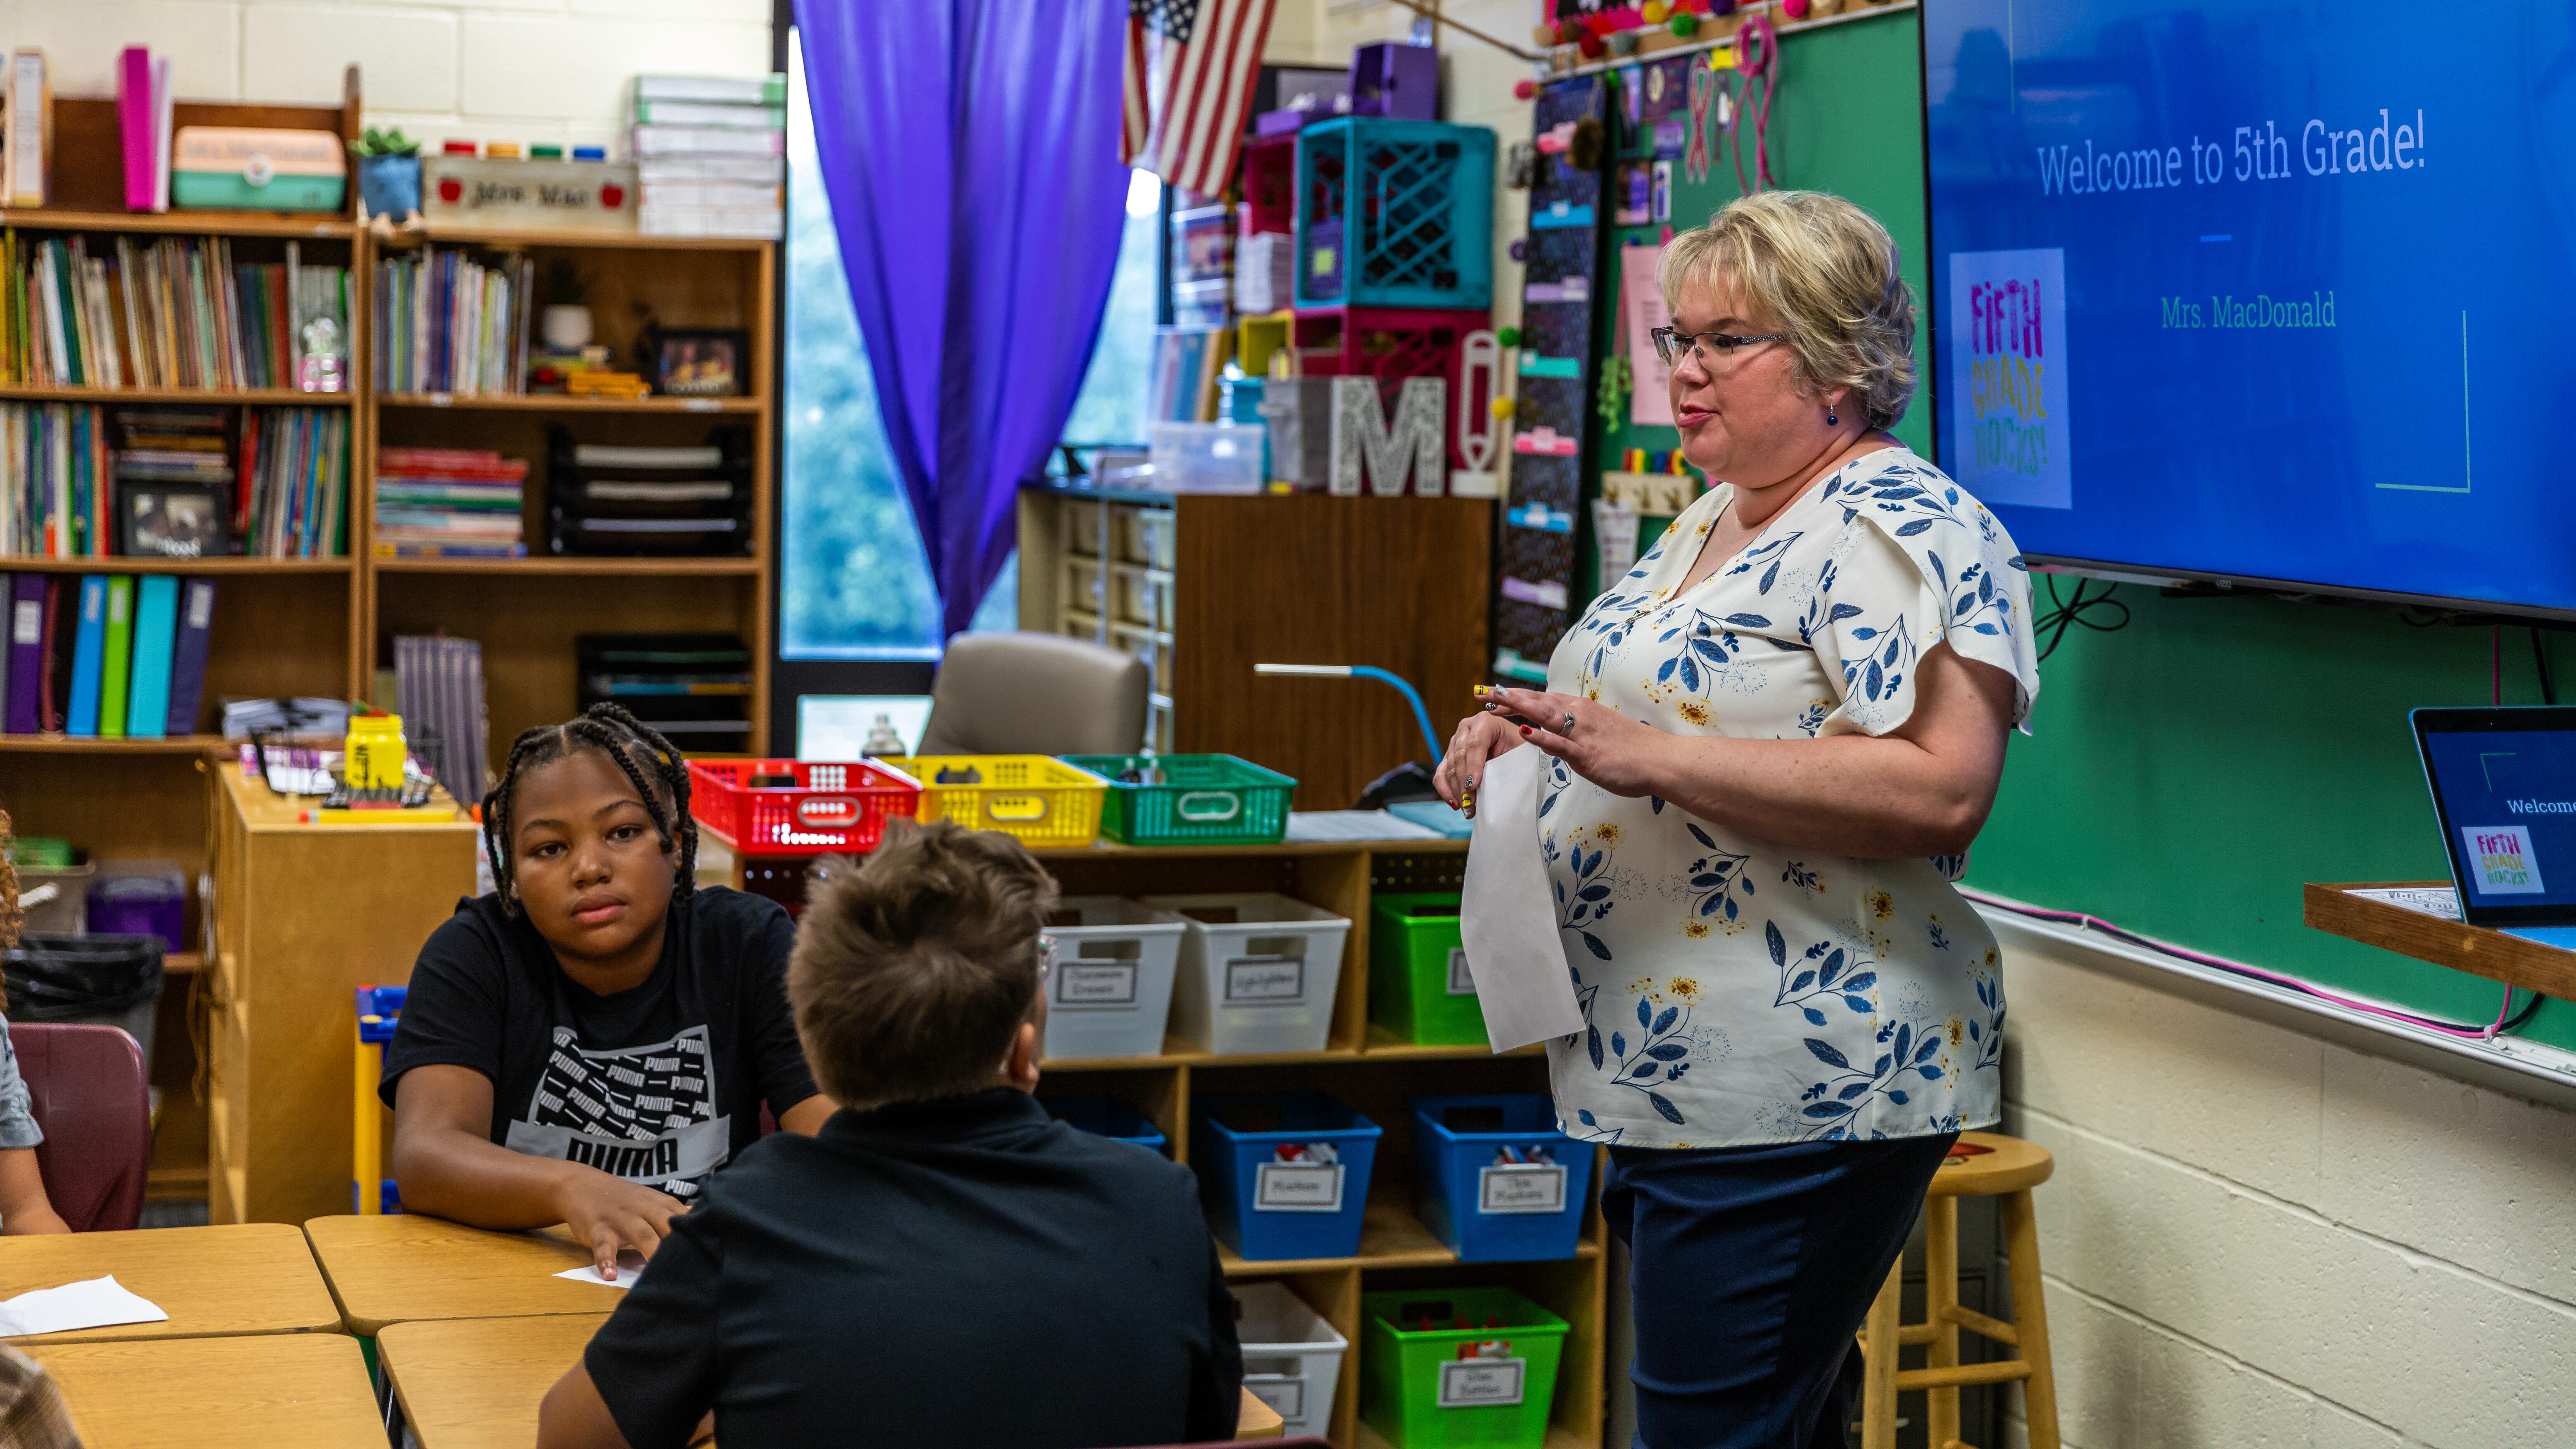 A teacher talks to middle school students in a classroom